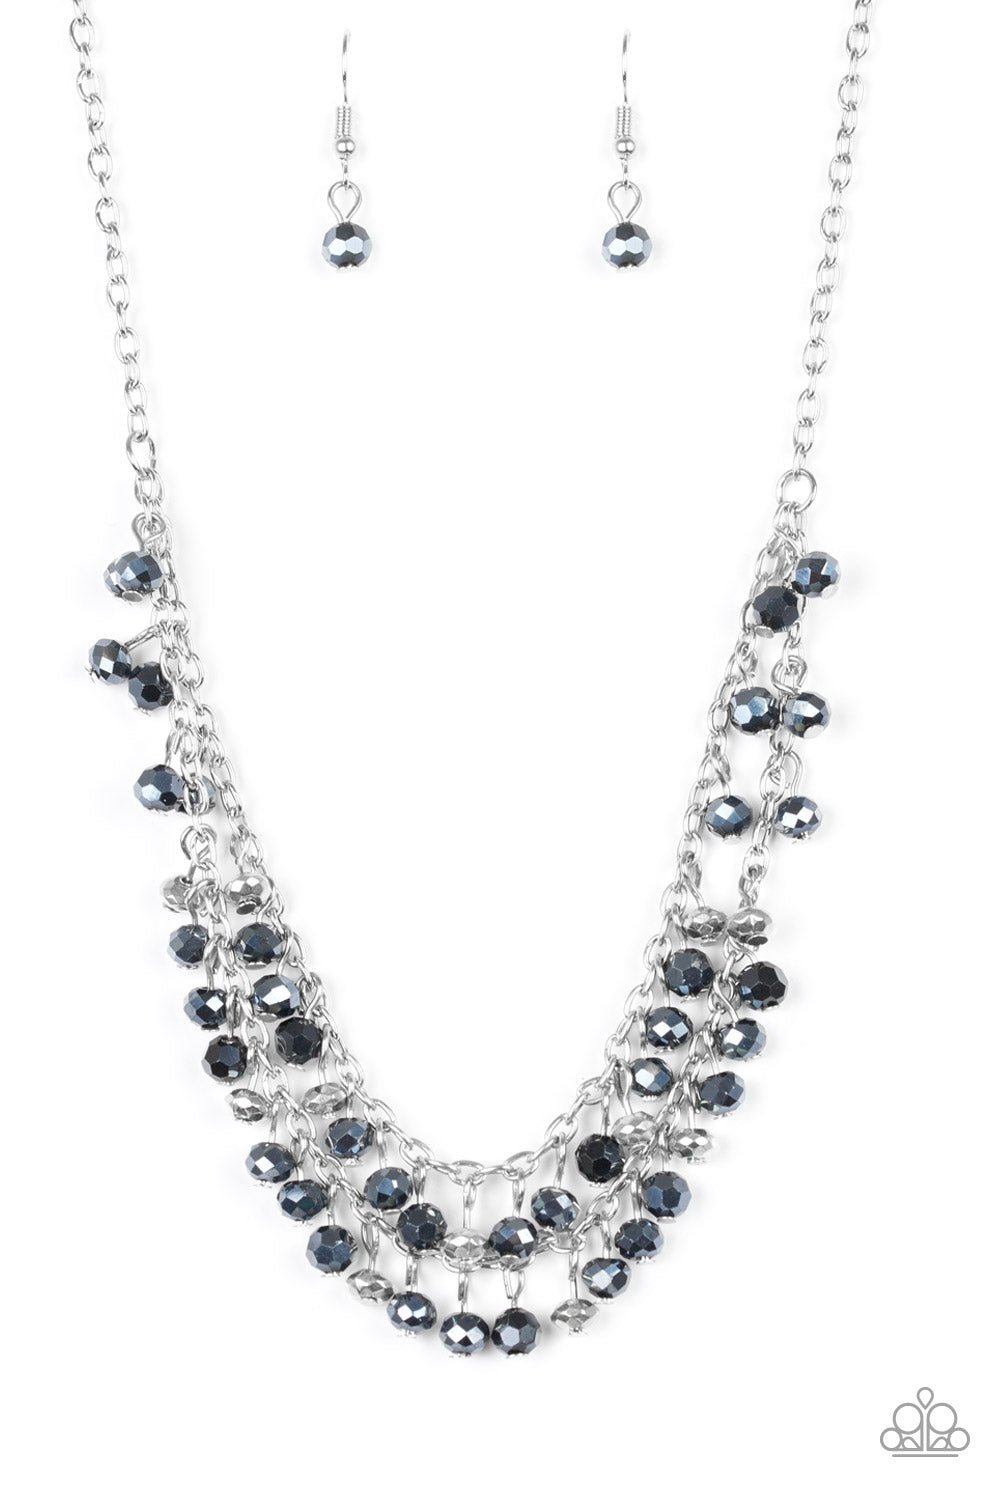 So In Season Blue Necklace - Paparazzi Accessories  Metallic blue gems and faceted silver beads dangle from two rows of silver chains, creating a glamorous fringe below the collar. Features an adjustable clasp closure.  Sold as one individual necklace. Includes one pair of matching earrings.